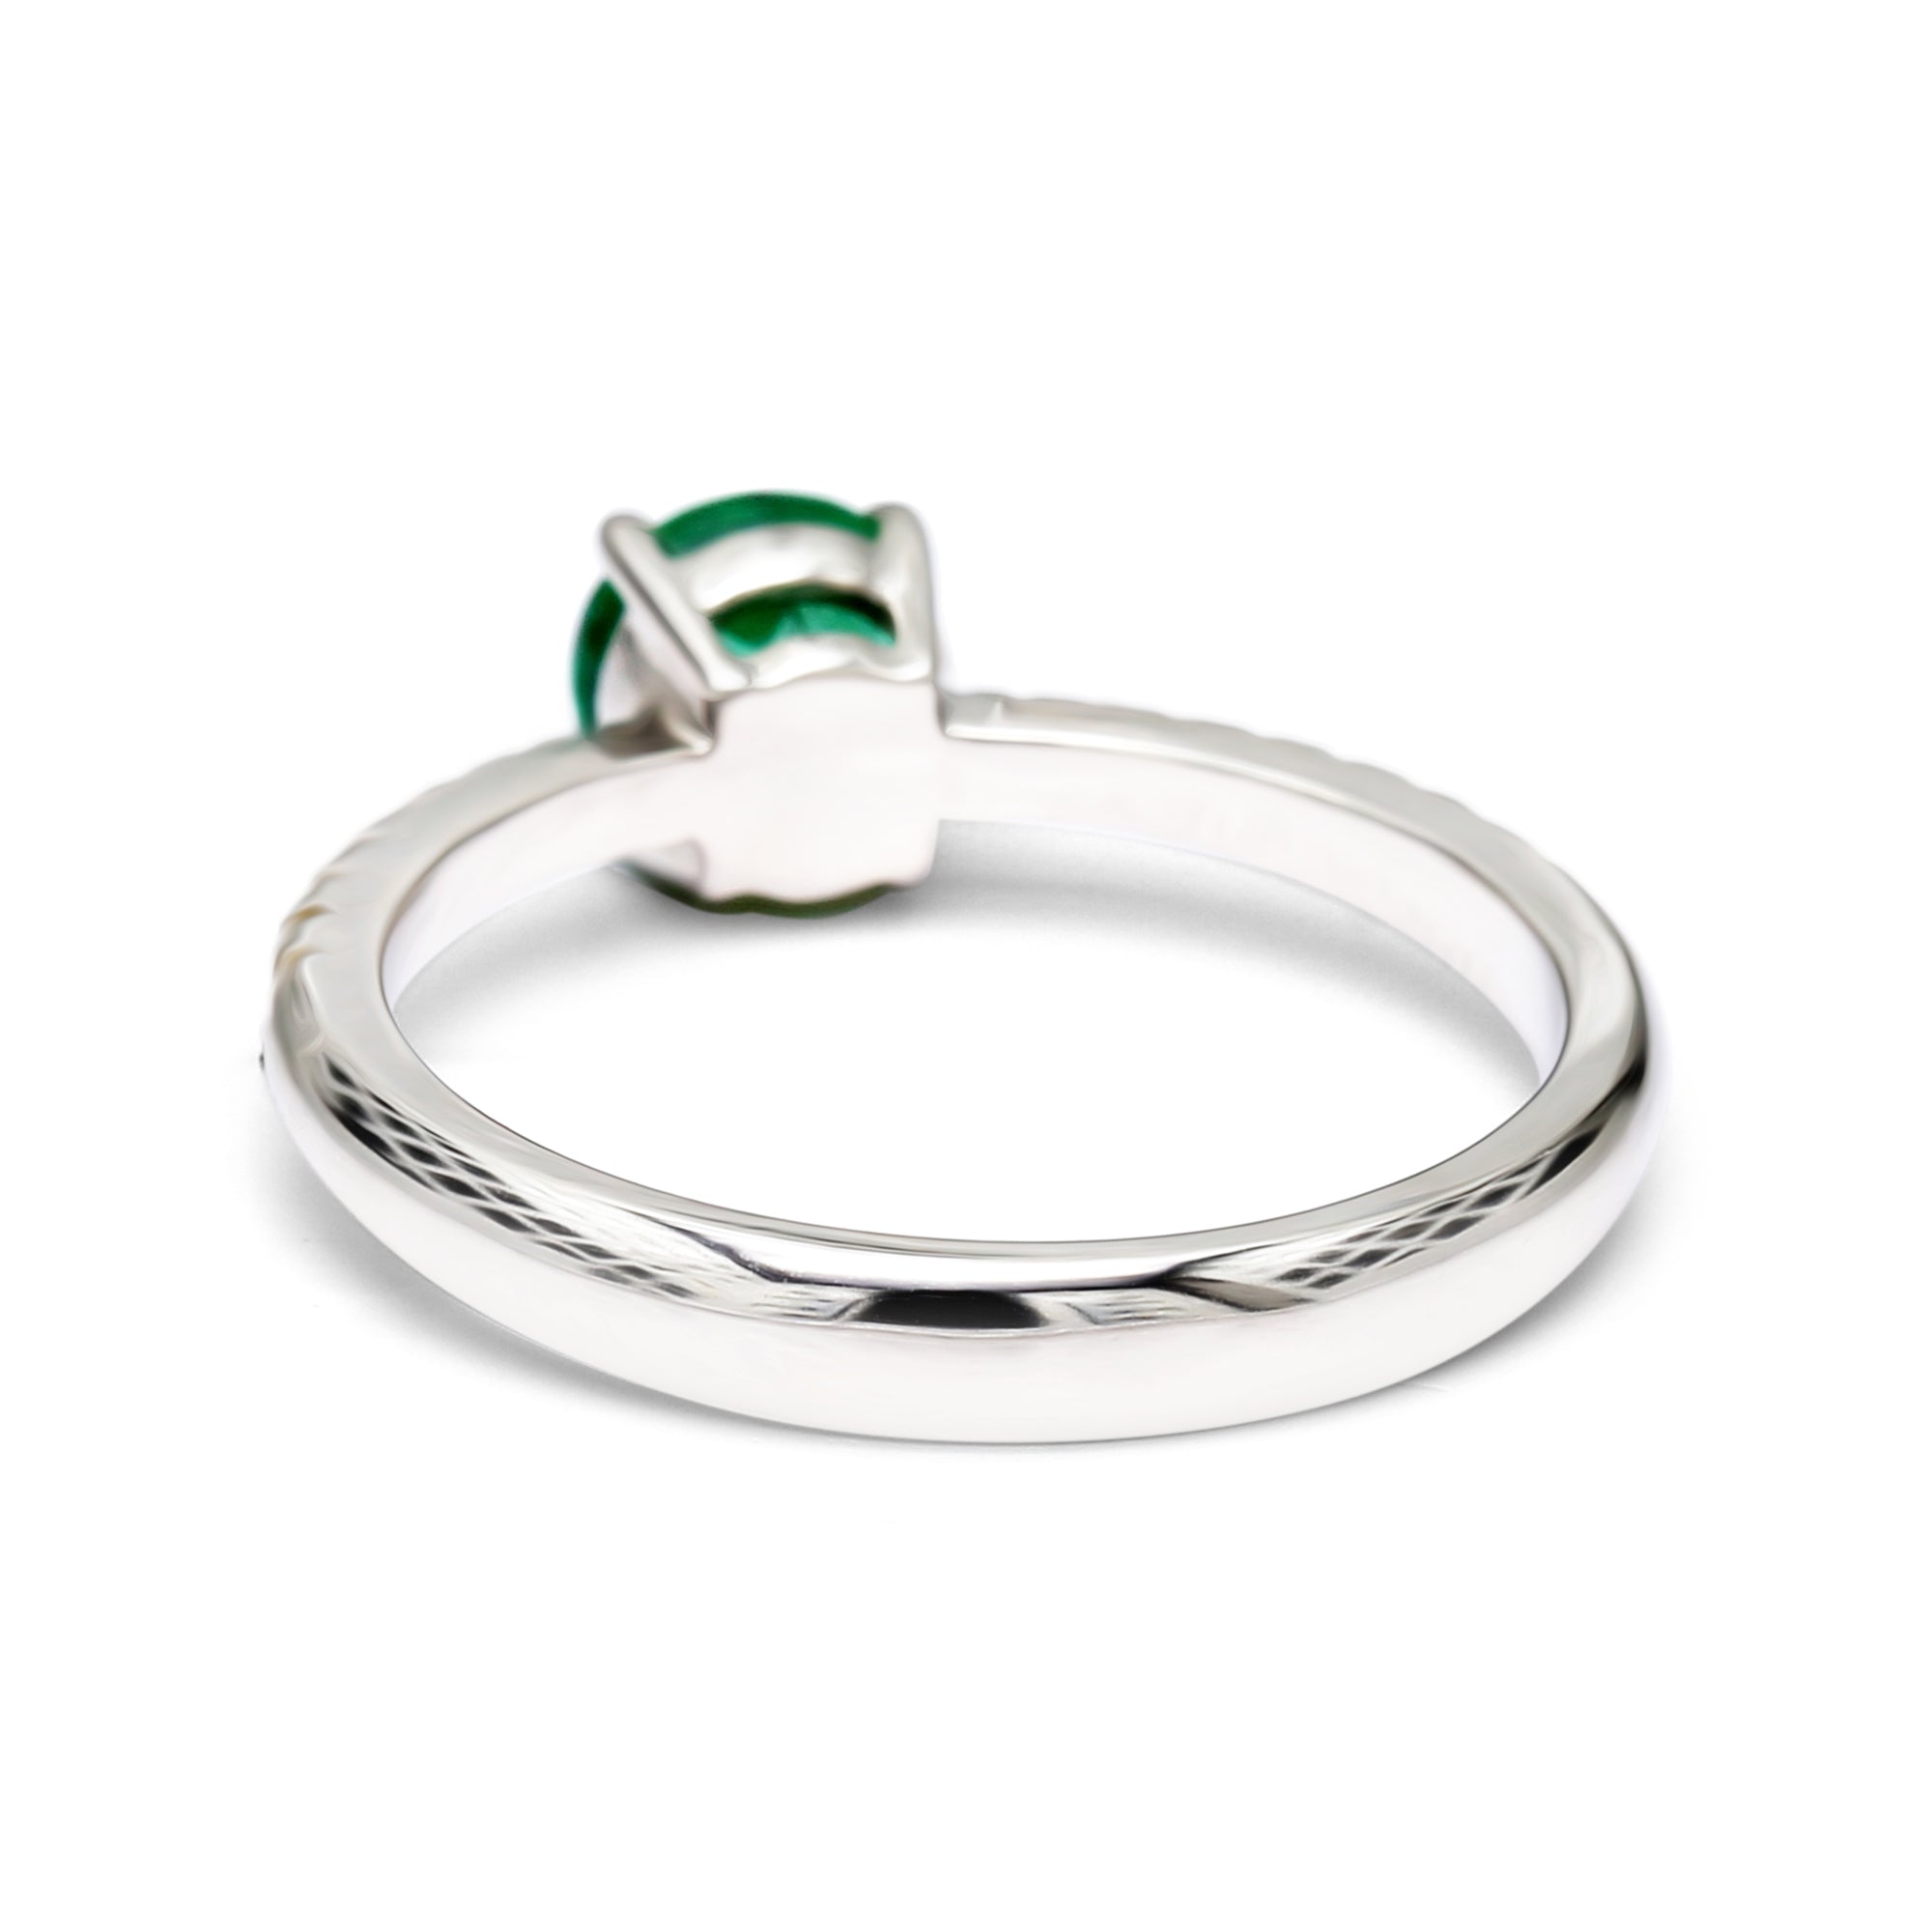 Emerald Round with Diamonds Ring - White Gold